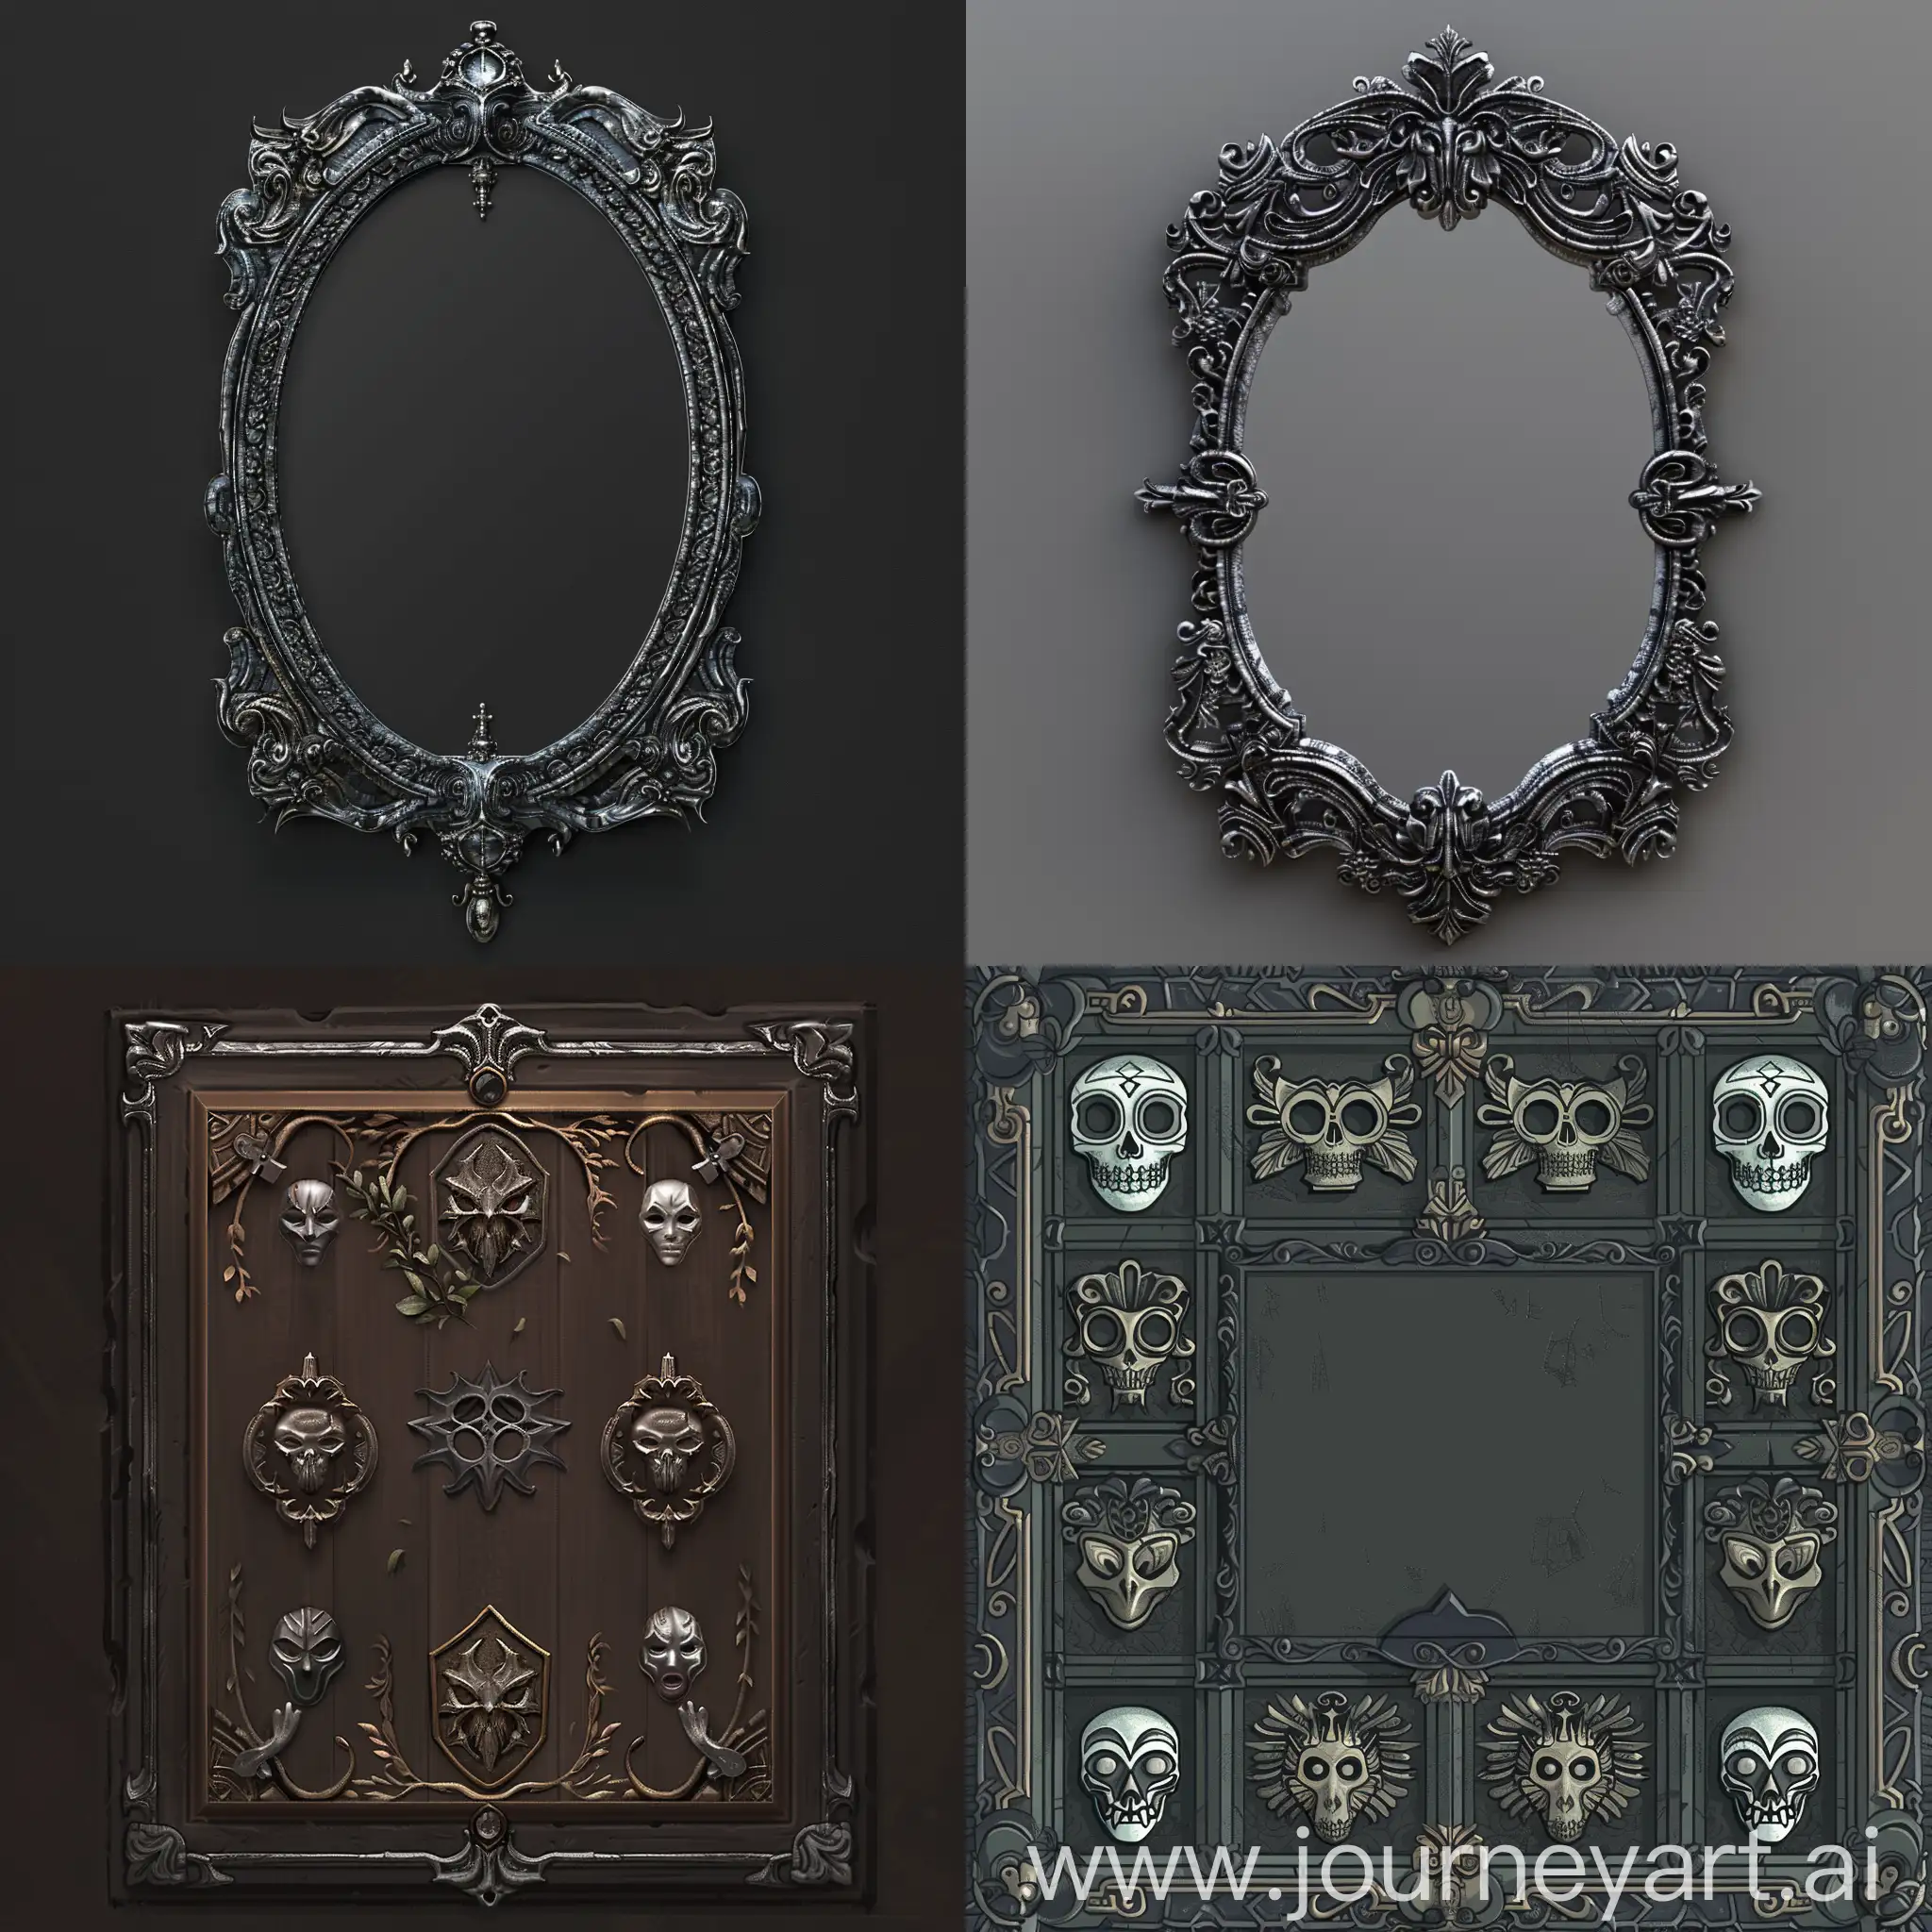 The mirror has an elegant and exquisite frame made of dark wood with silver patterns that depict the various masks used in the game. These patterns may glow slightly, drawing attention to the mirror. "Pixel Game" "Old game" "2d game" "Pixel art"